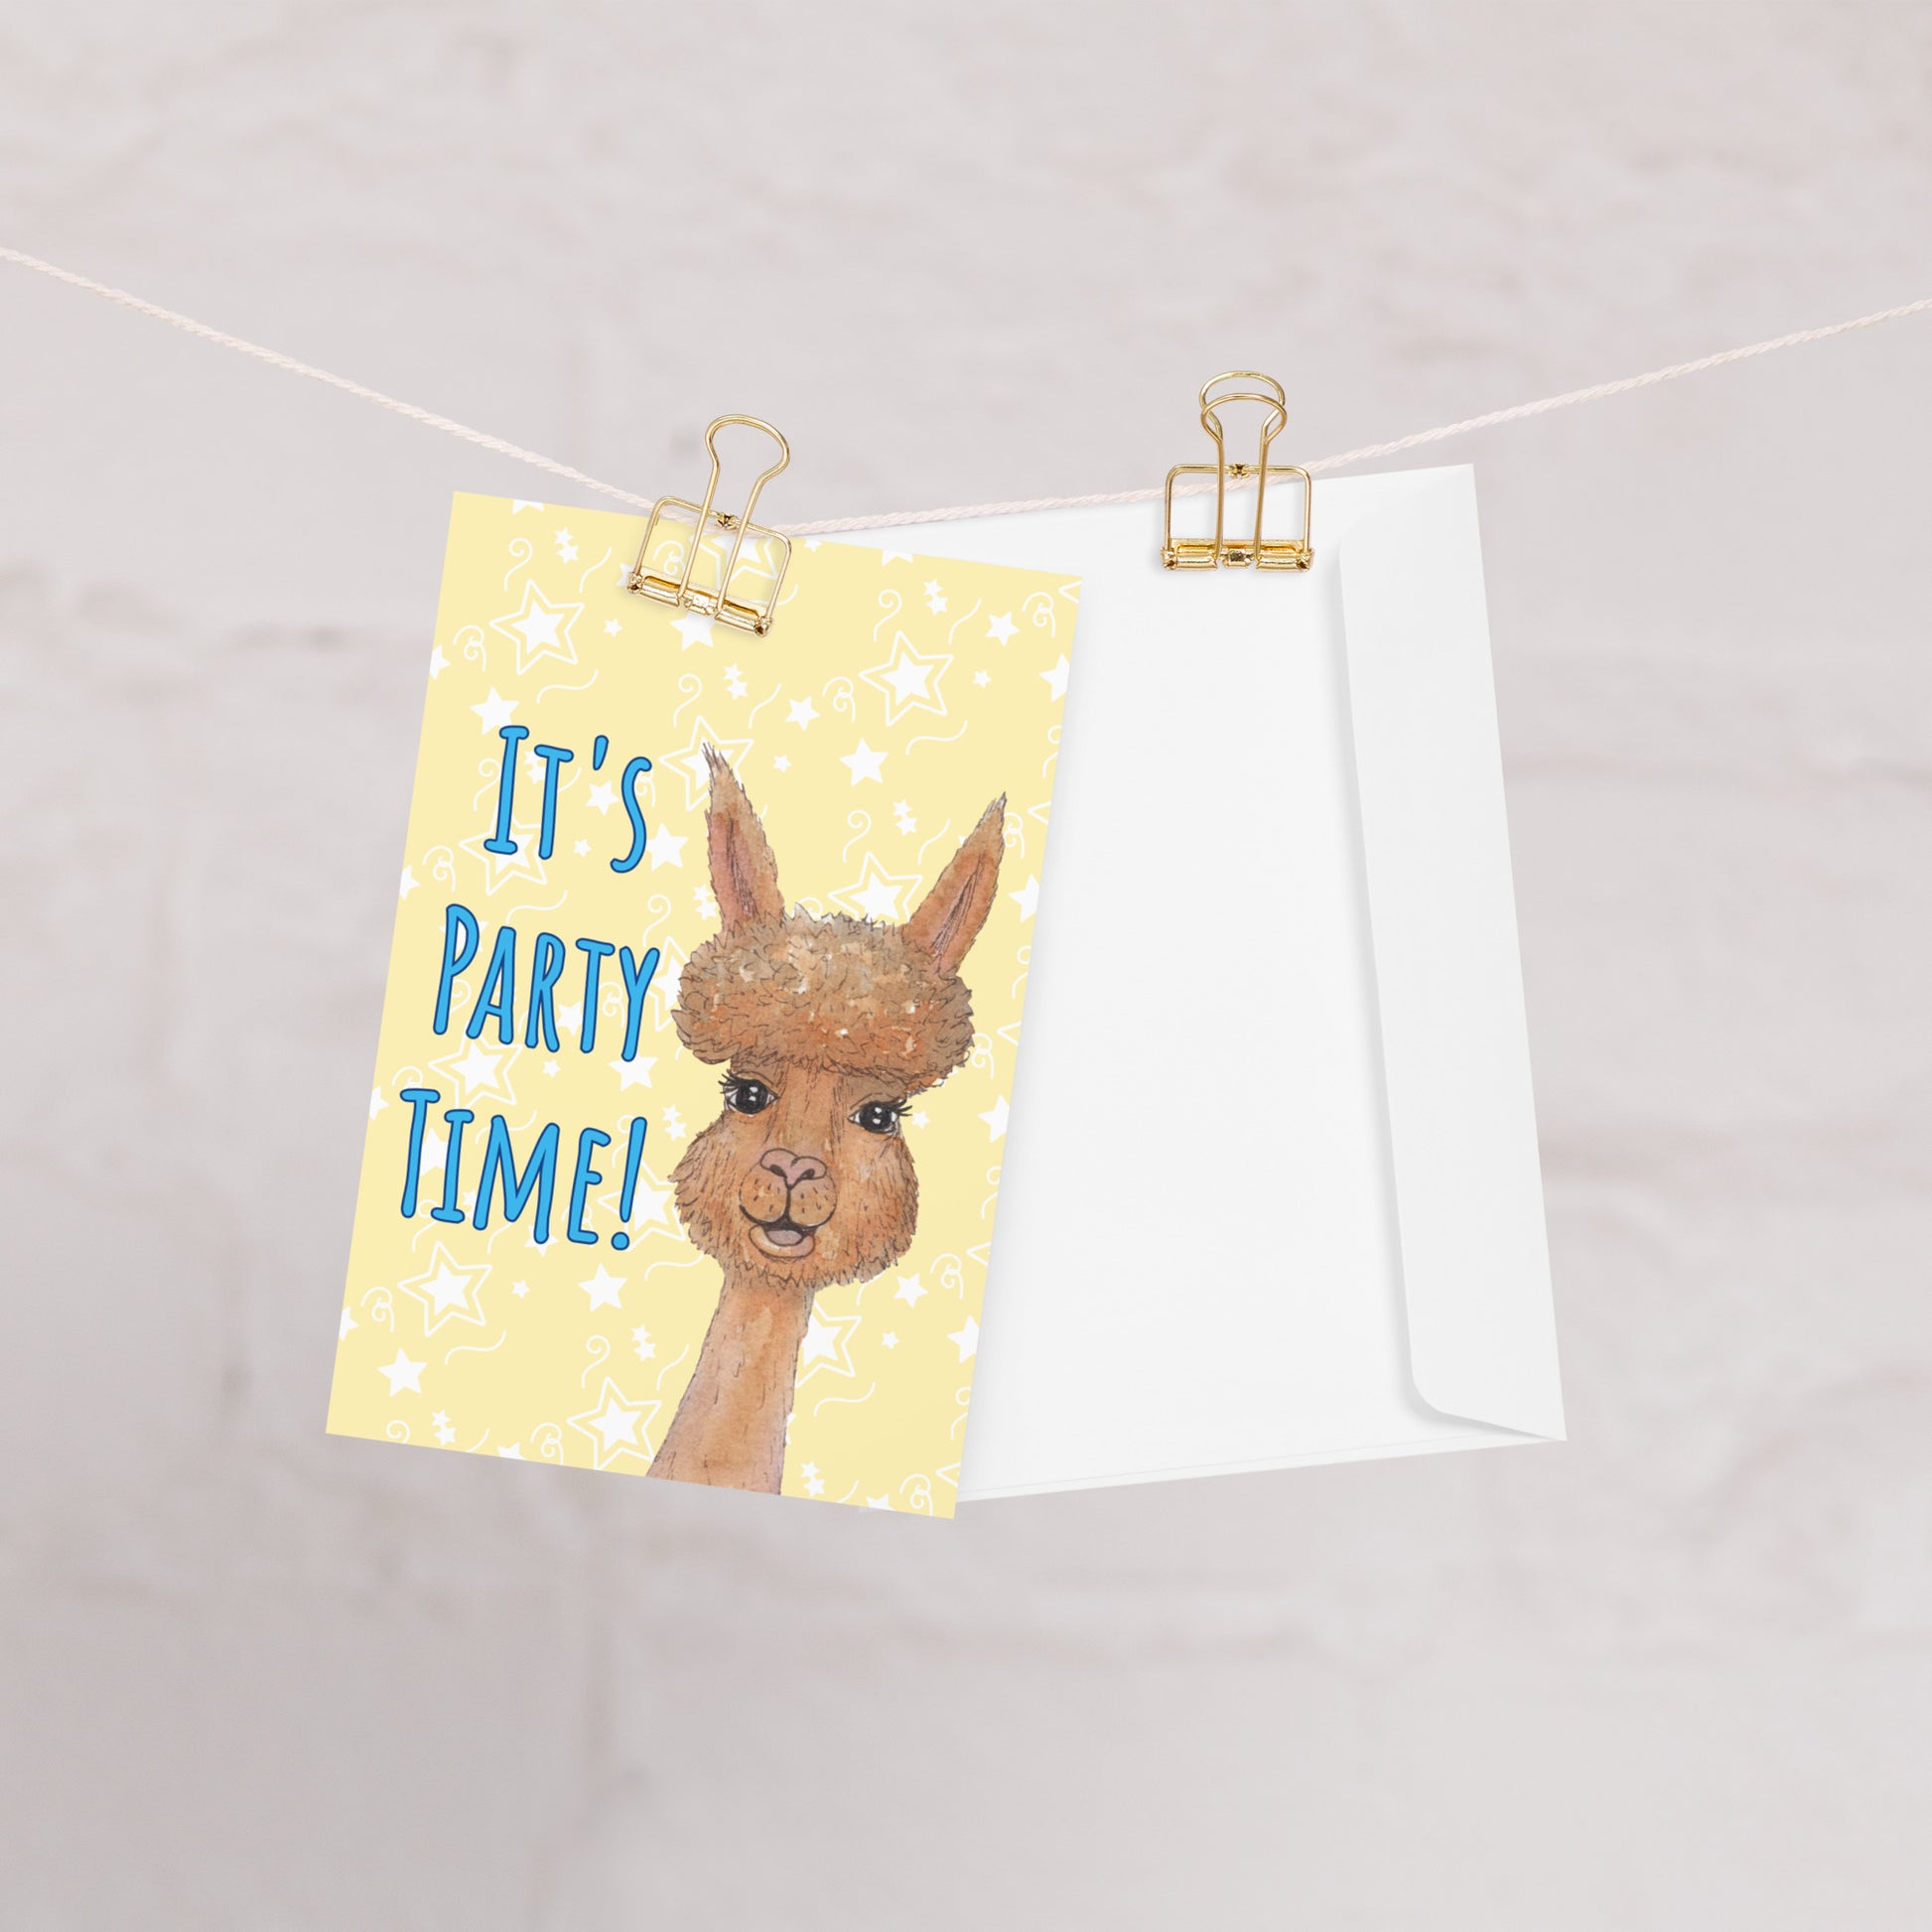 4 by 6 inch party alpaca greeting card and envelope. Image shows card and envelope hanging by clips on string. Background of card is pastel yellow with white star accents. Front has watercolor alpaca and text: It's party time!